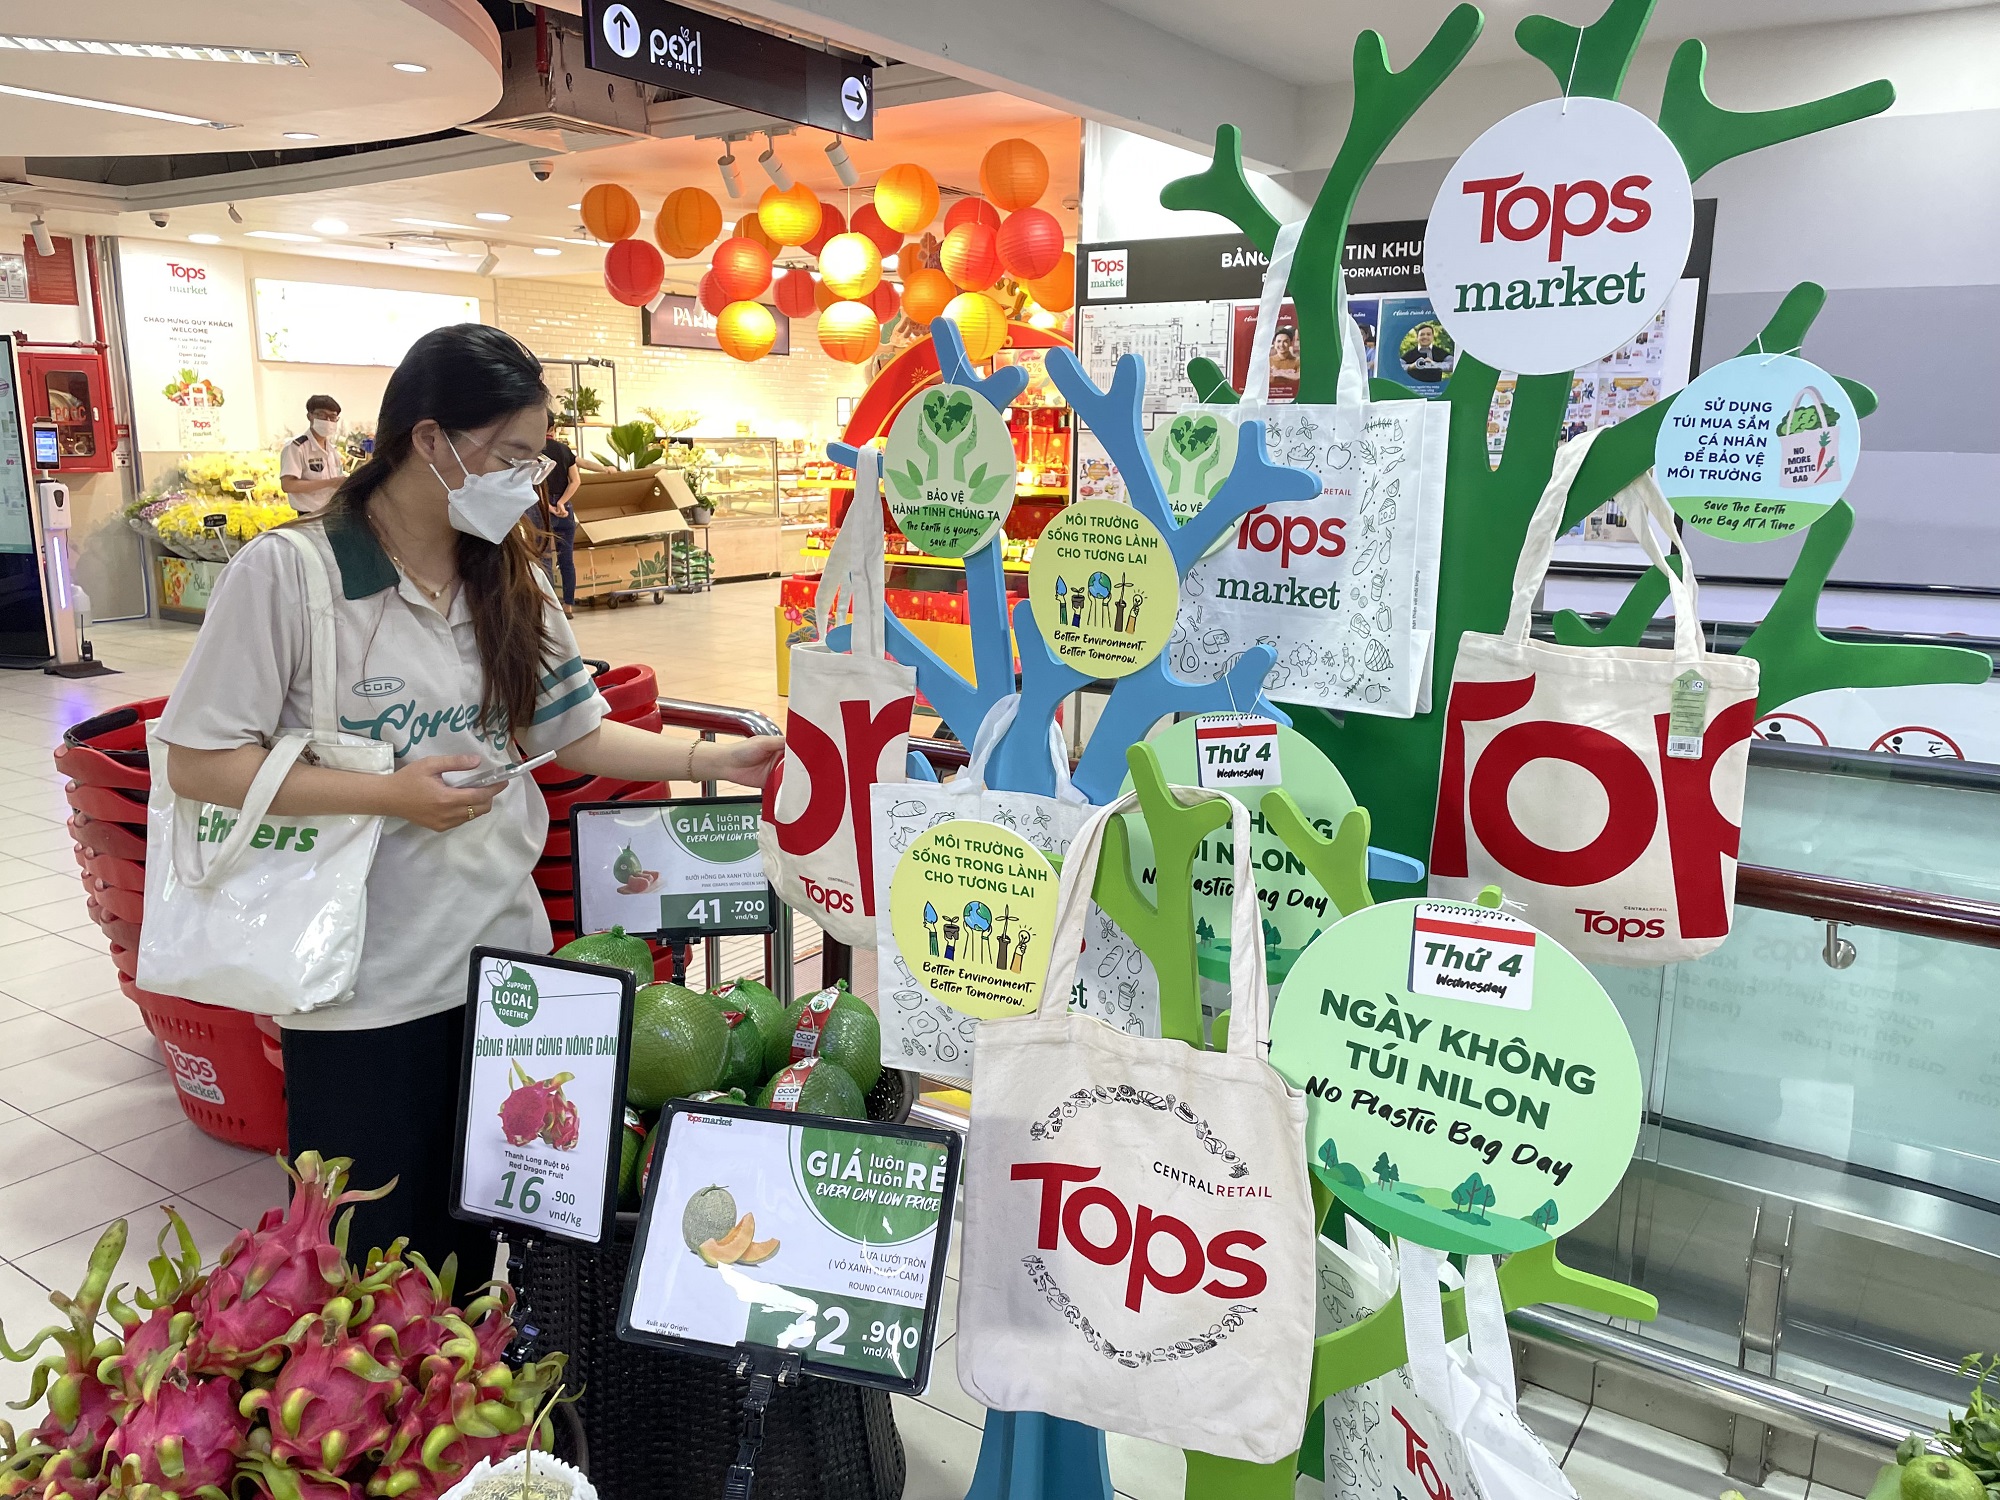 Central Retail in Vietnam organizes the “No Plastic Bag Day” at Tops Market Thao Dien